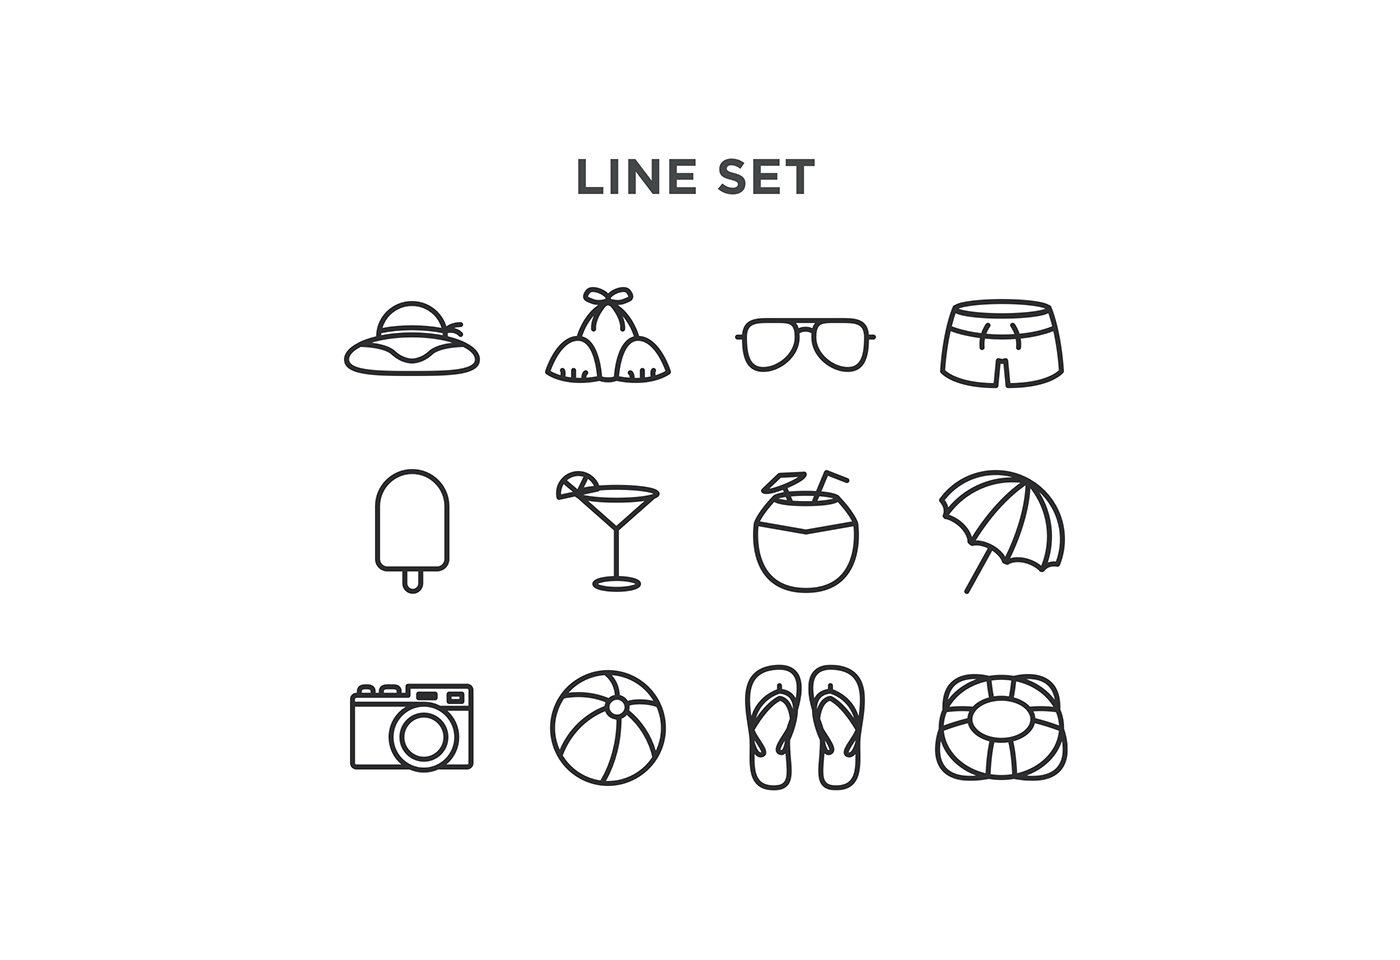 free icons free download Icon flat summer Summer icons hat drink sunglass camera UI